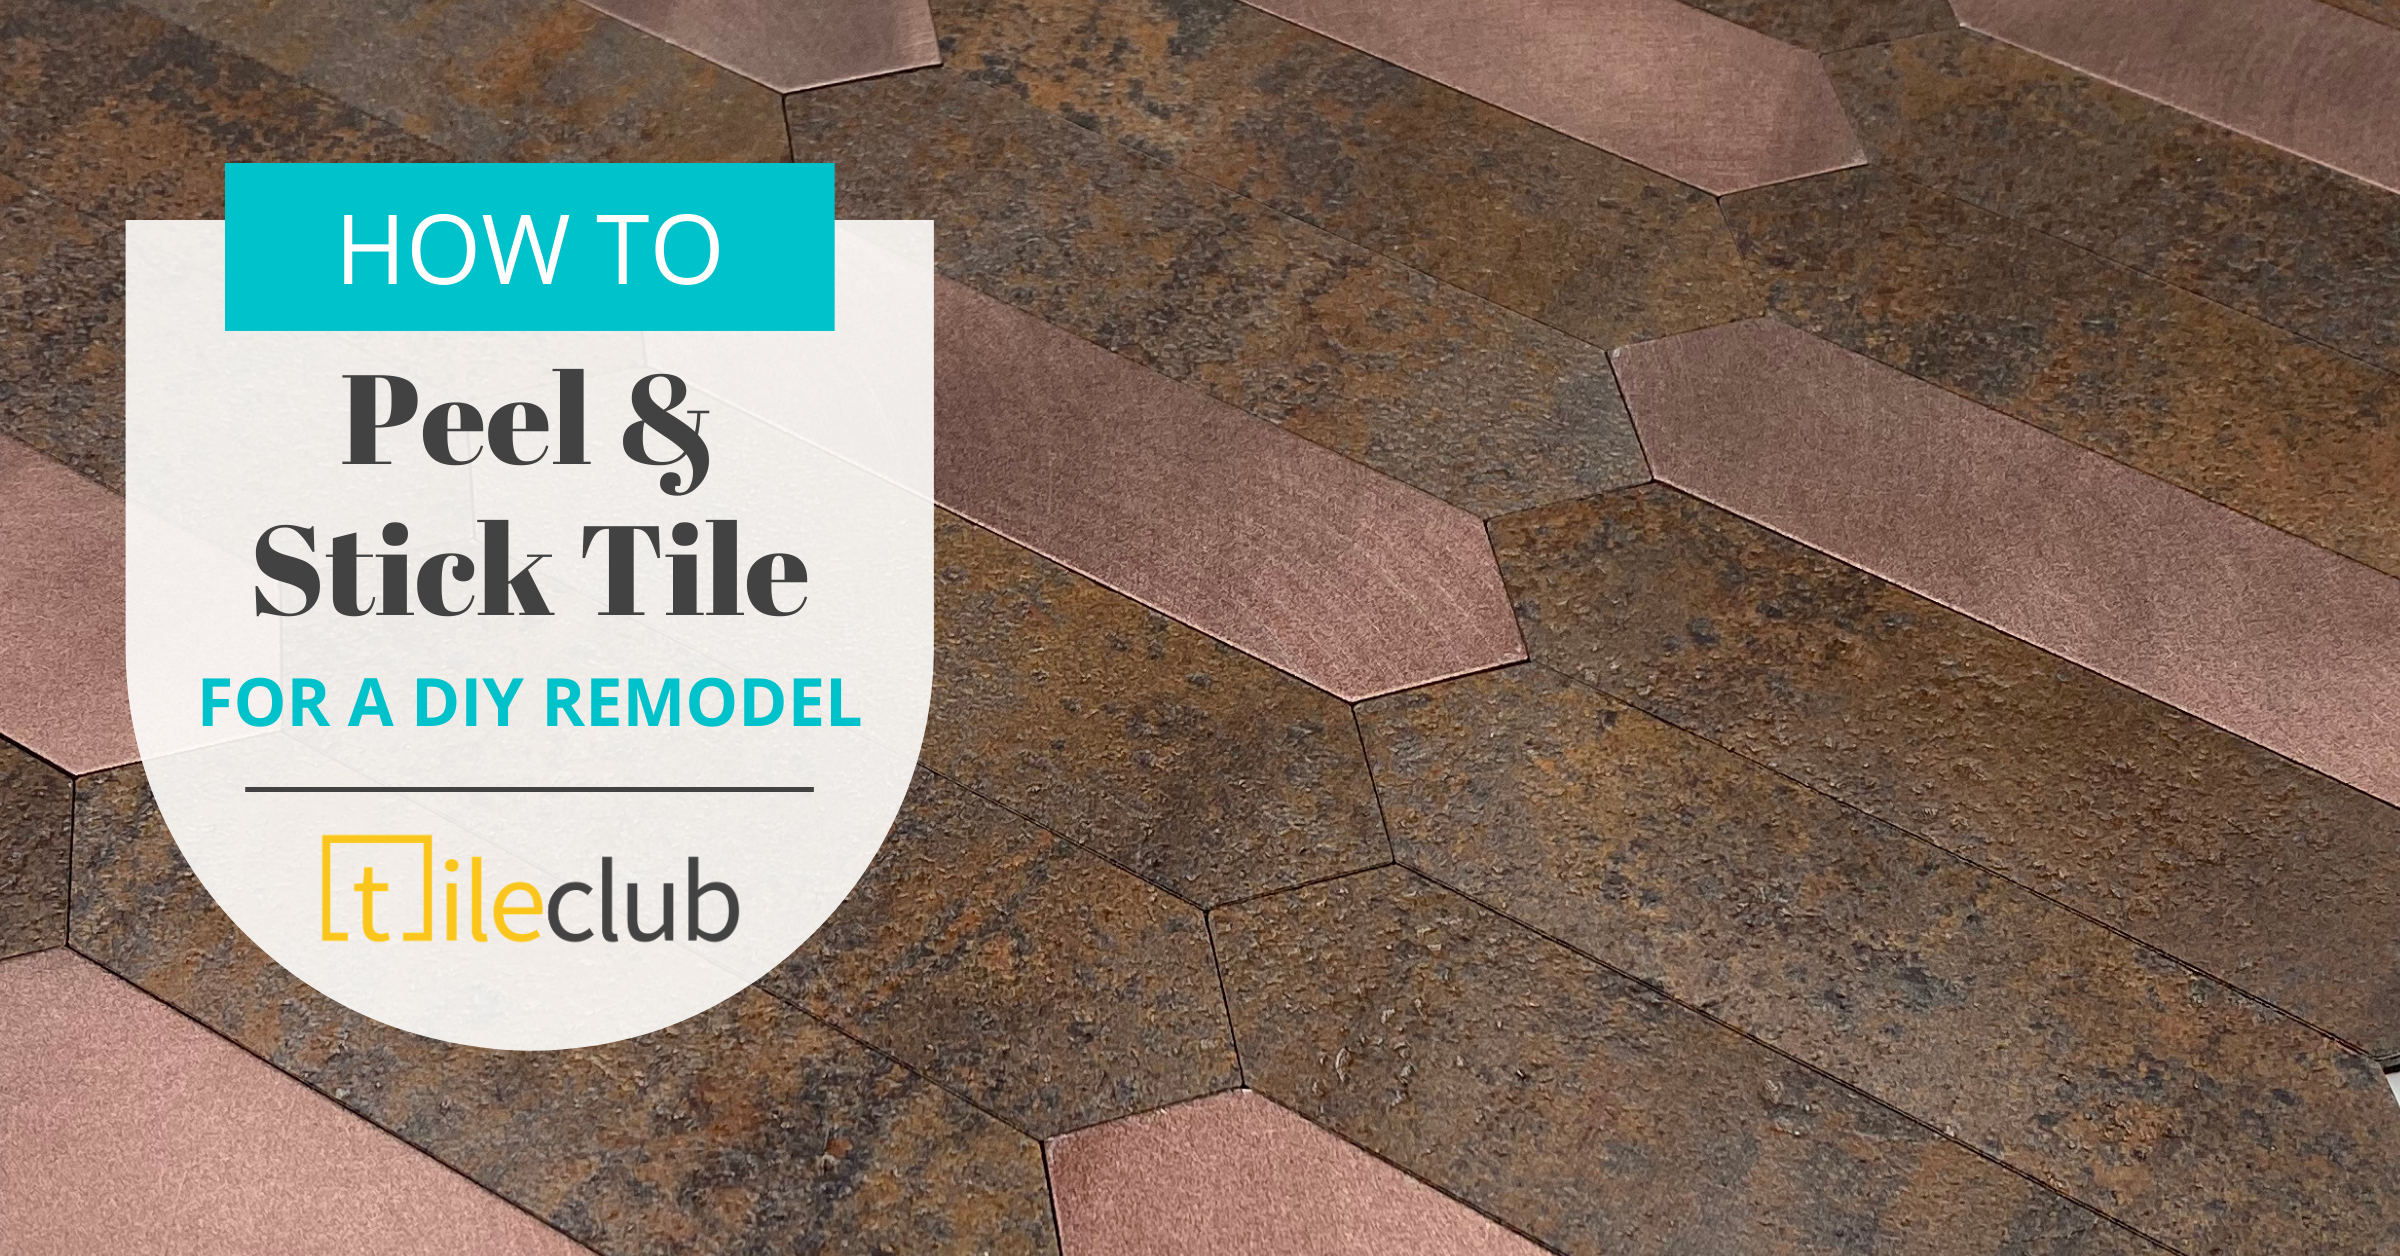 How to Peel and Stick Tile for a DIY Remodel